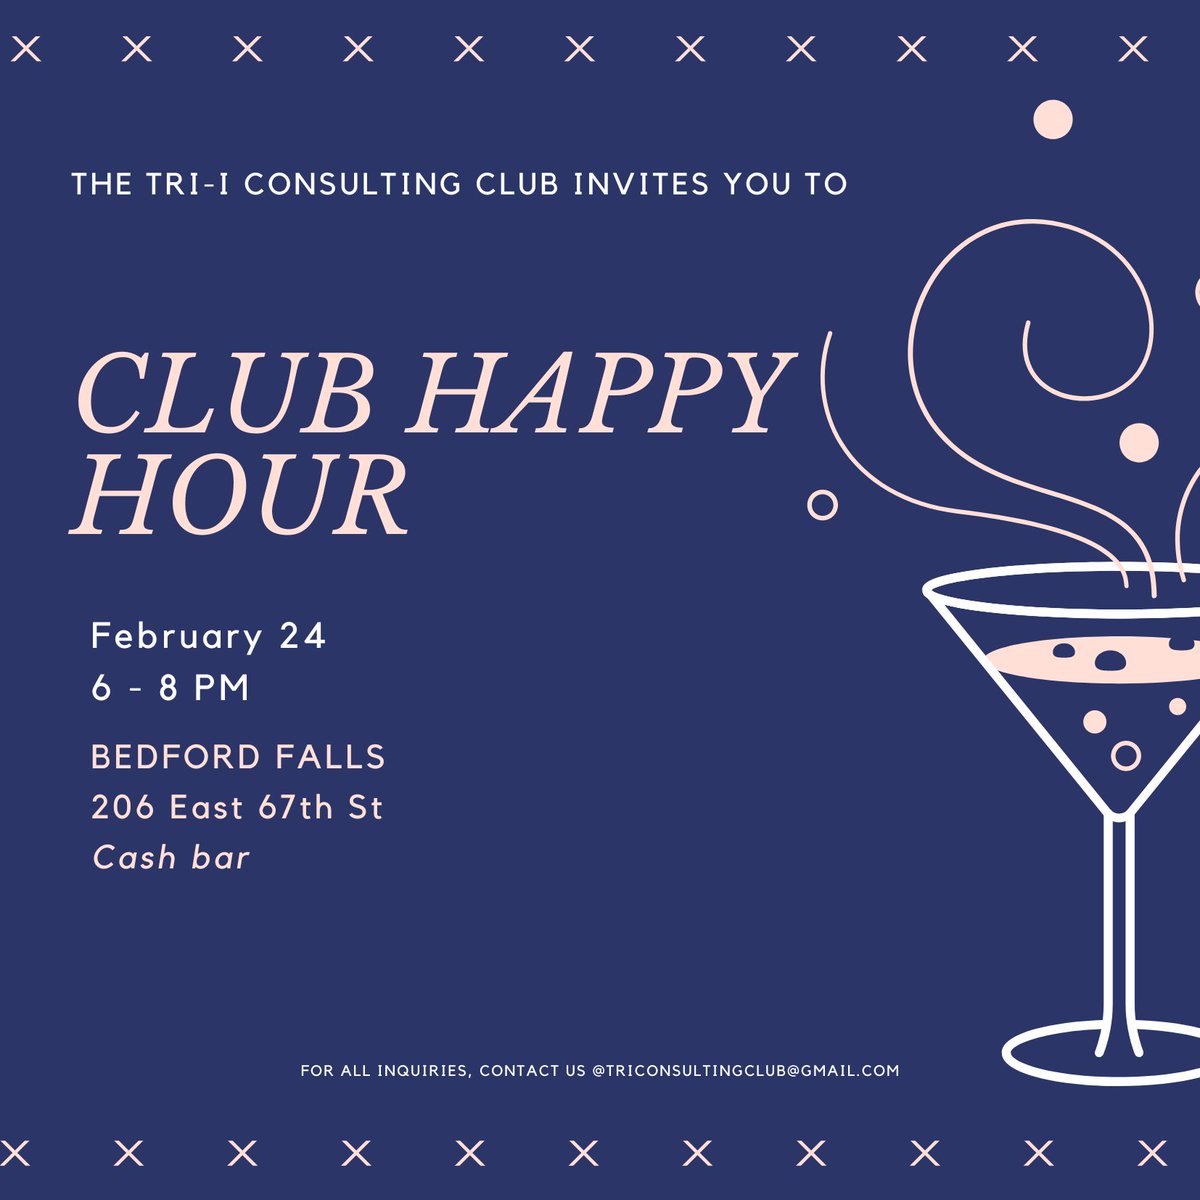 Join us next Friday, February 24th 6-8pm at Bedford Falls (206 E 67th ST) for our club happy hour! Hope to see you all there 🍸 

#consulting #happyhour #event #consultingclub #weillcornell #rockefelleruniversity #sloankettering